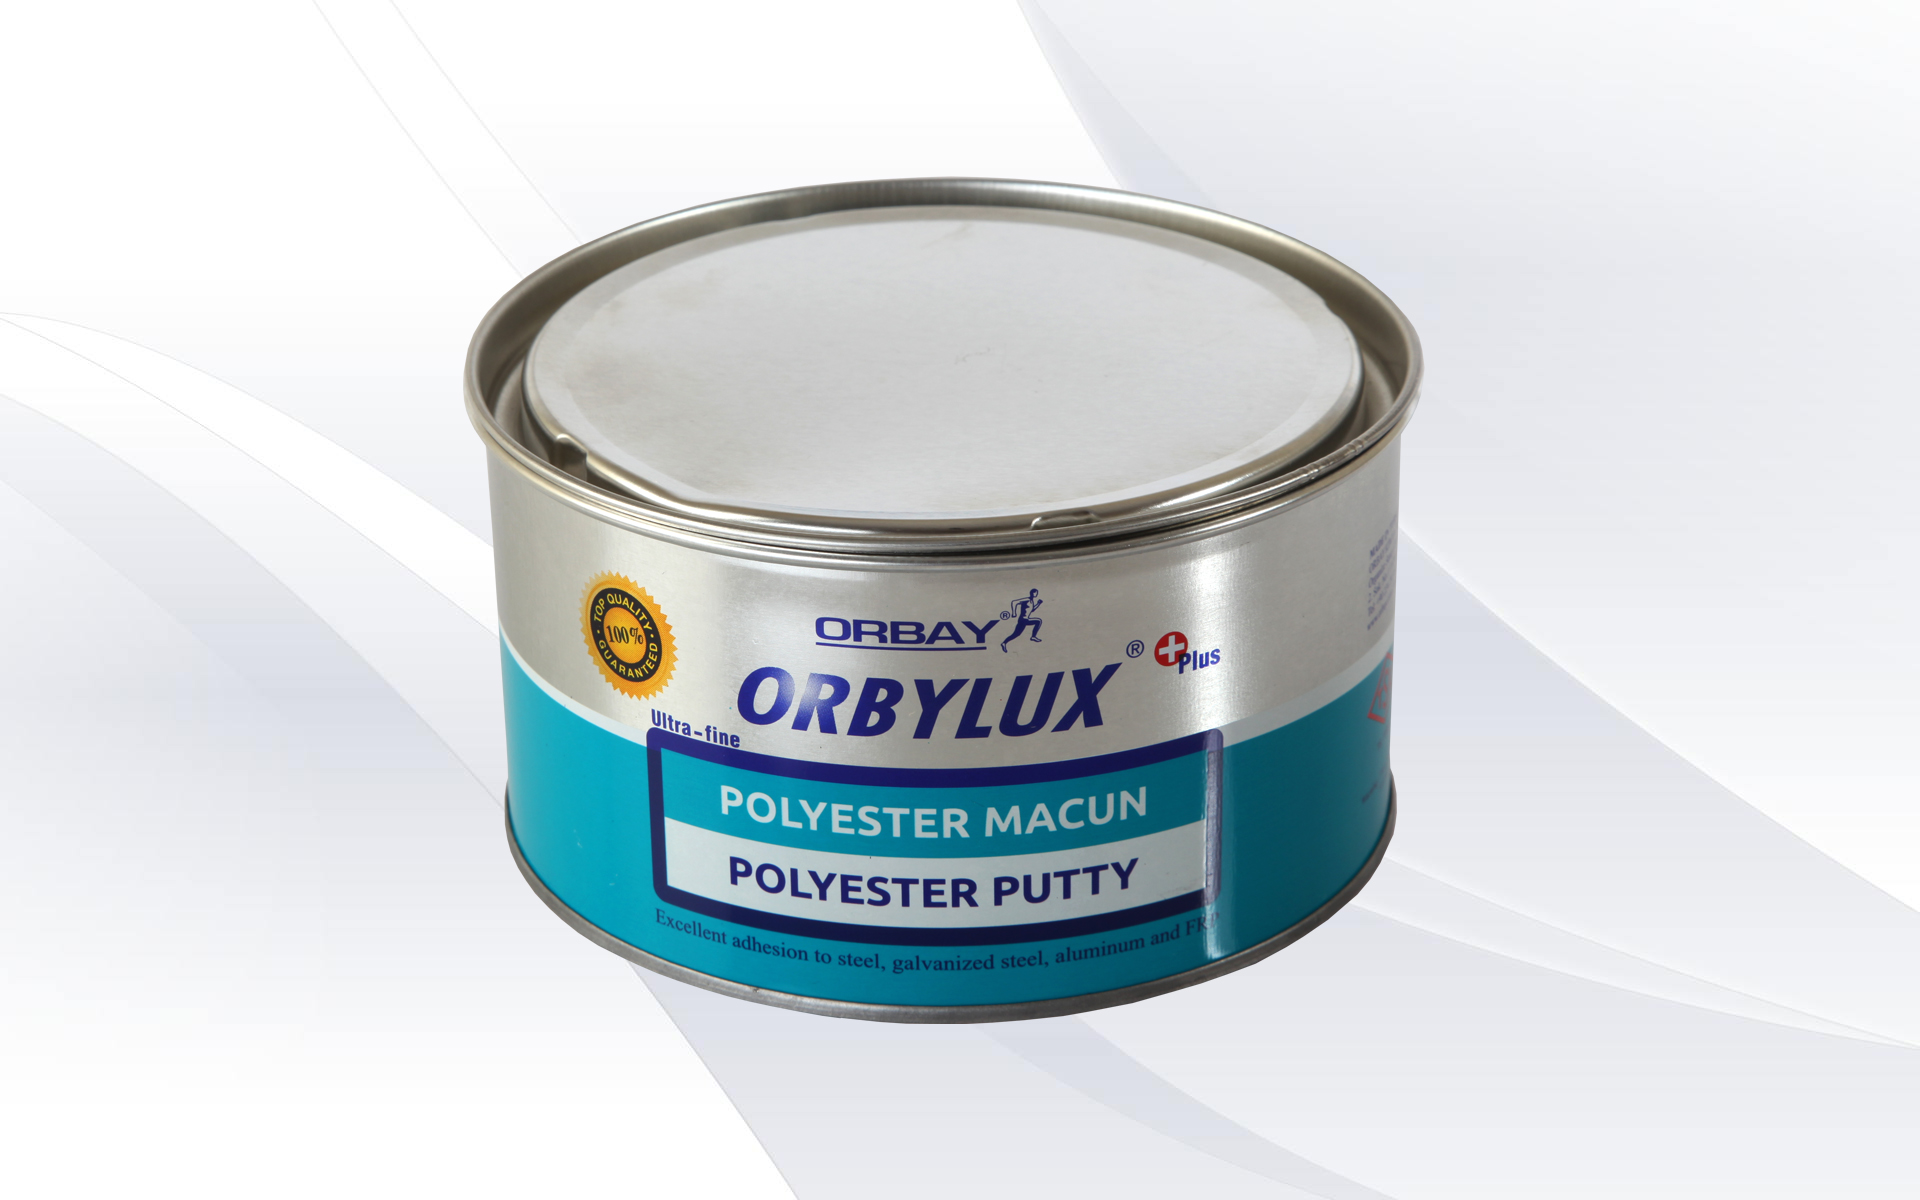 Orbylux Plus Polyester Putty